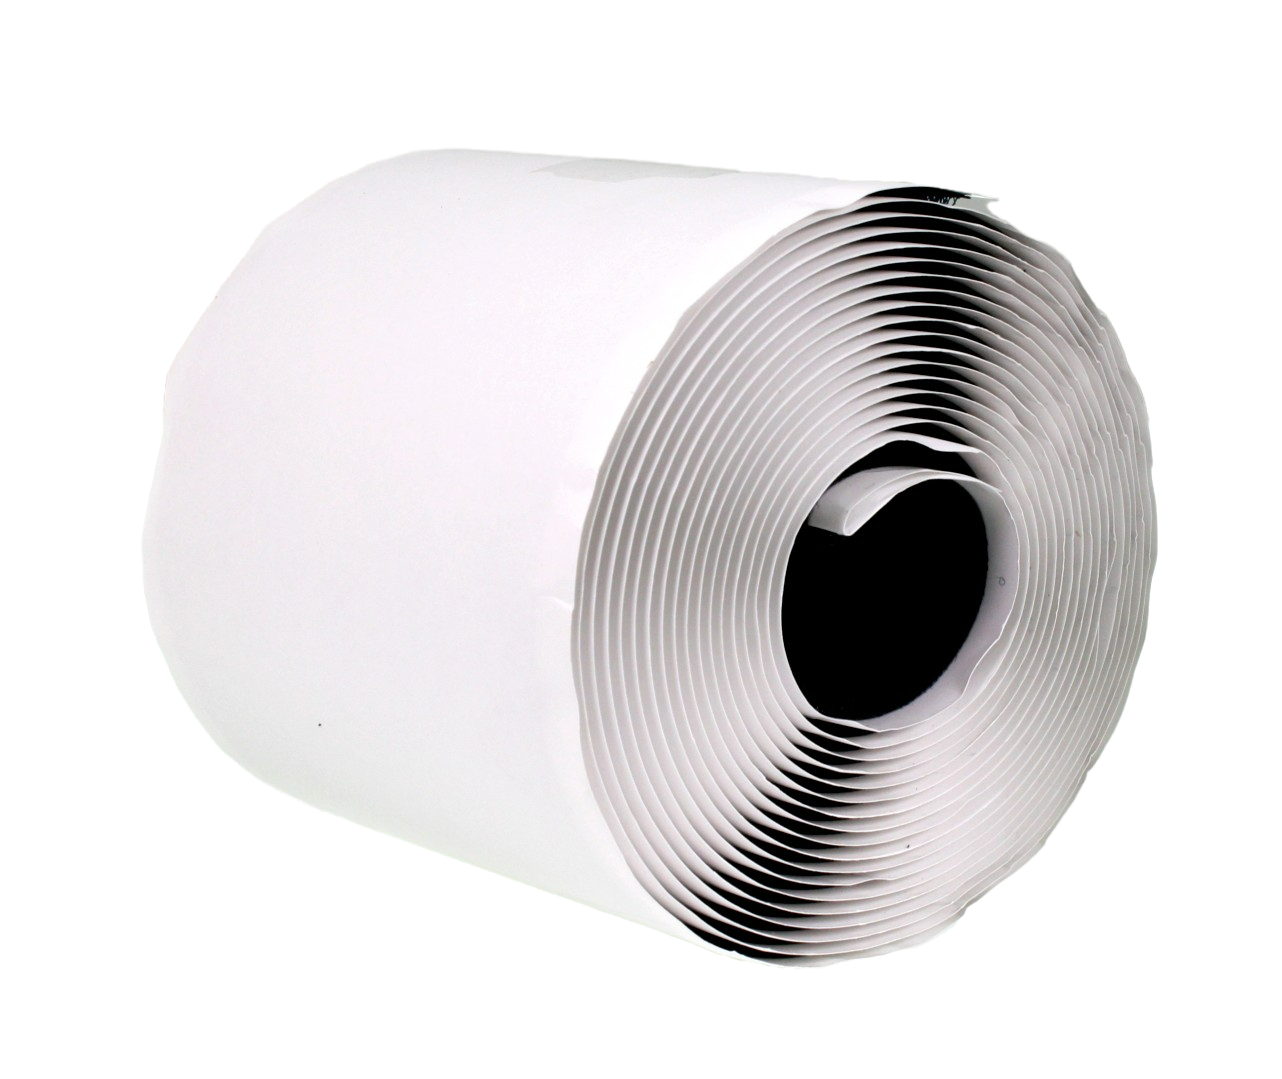 An end view of a roll of 4" hook tape, adhesive backed